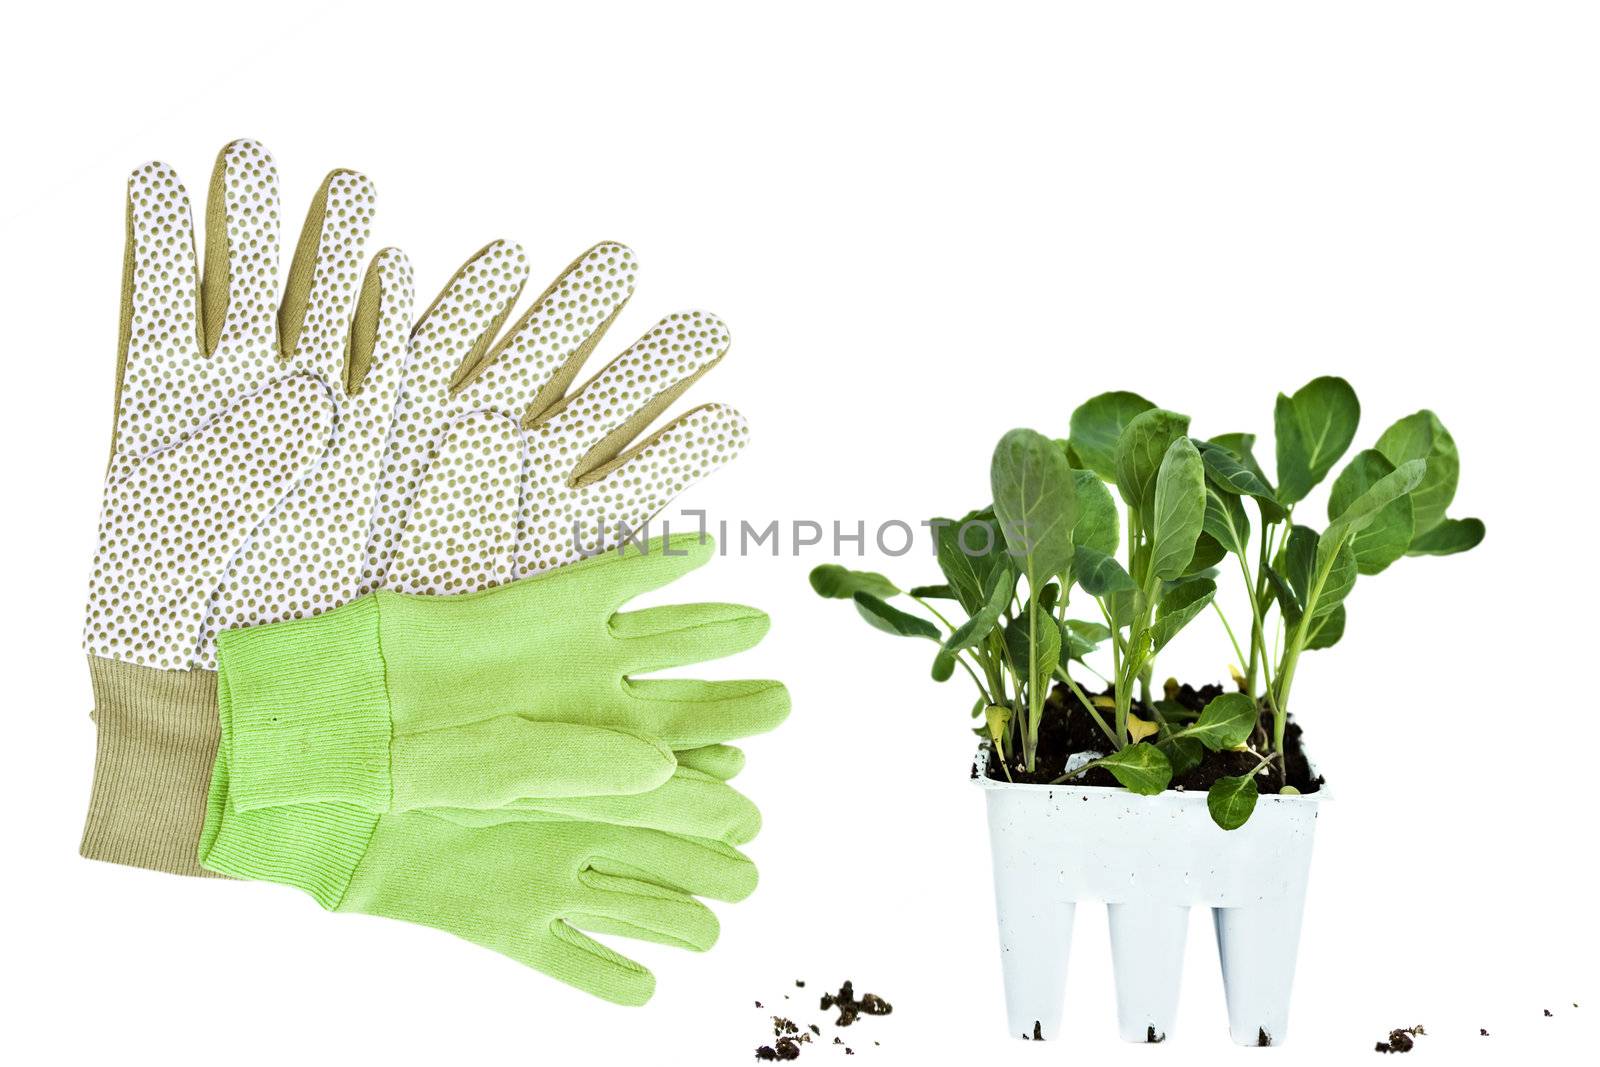 Gardening gloves and plants by StephanieFrey